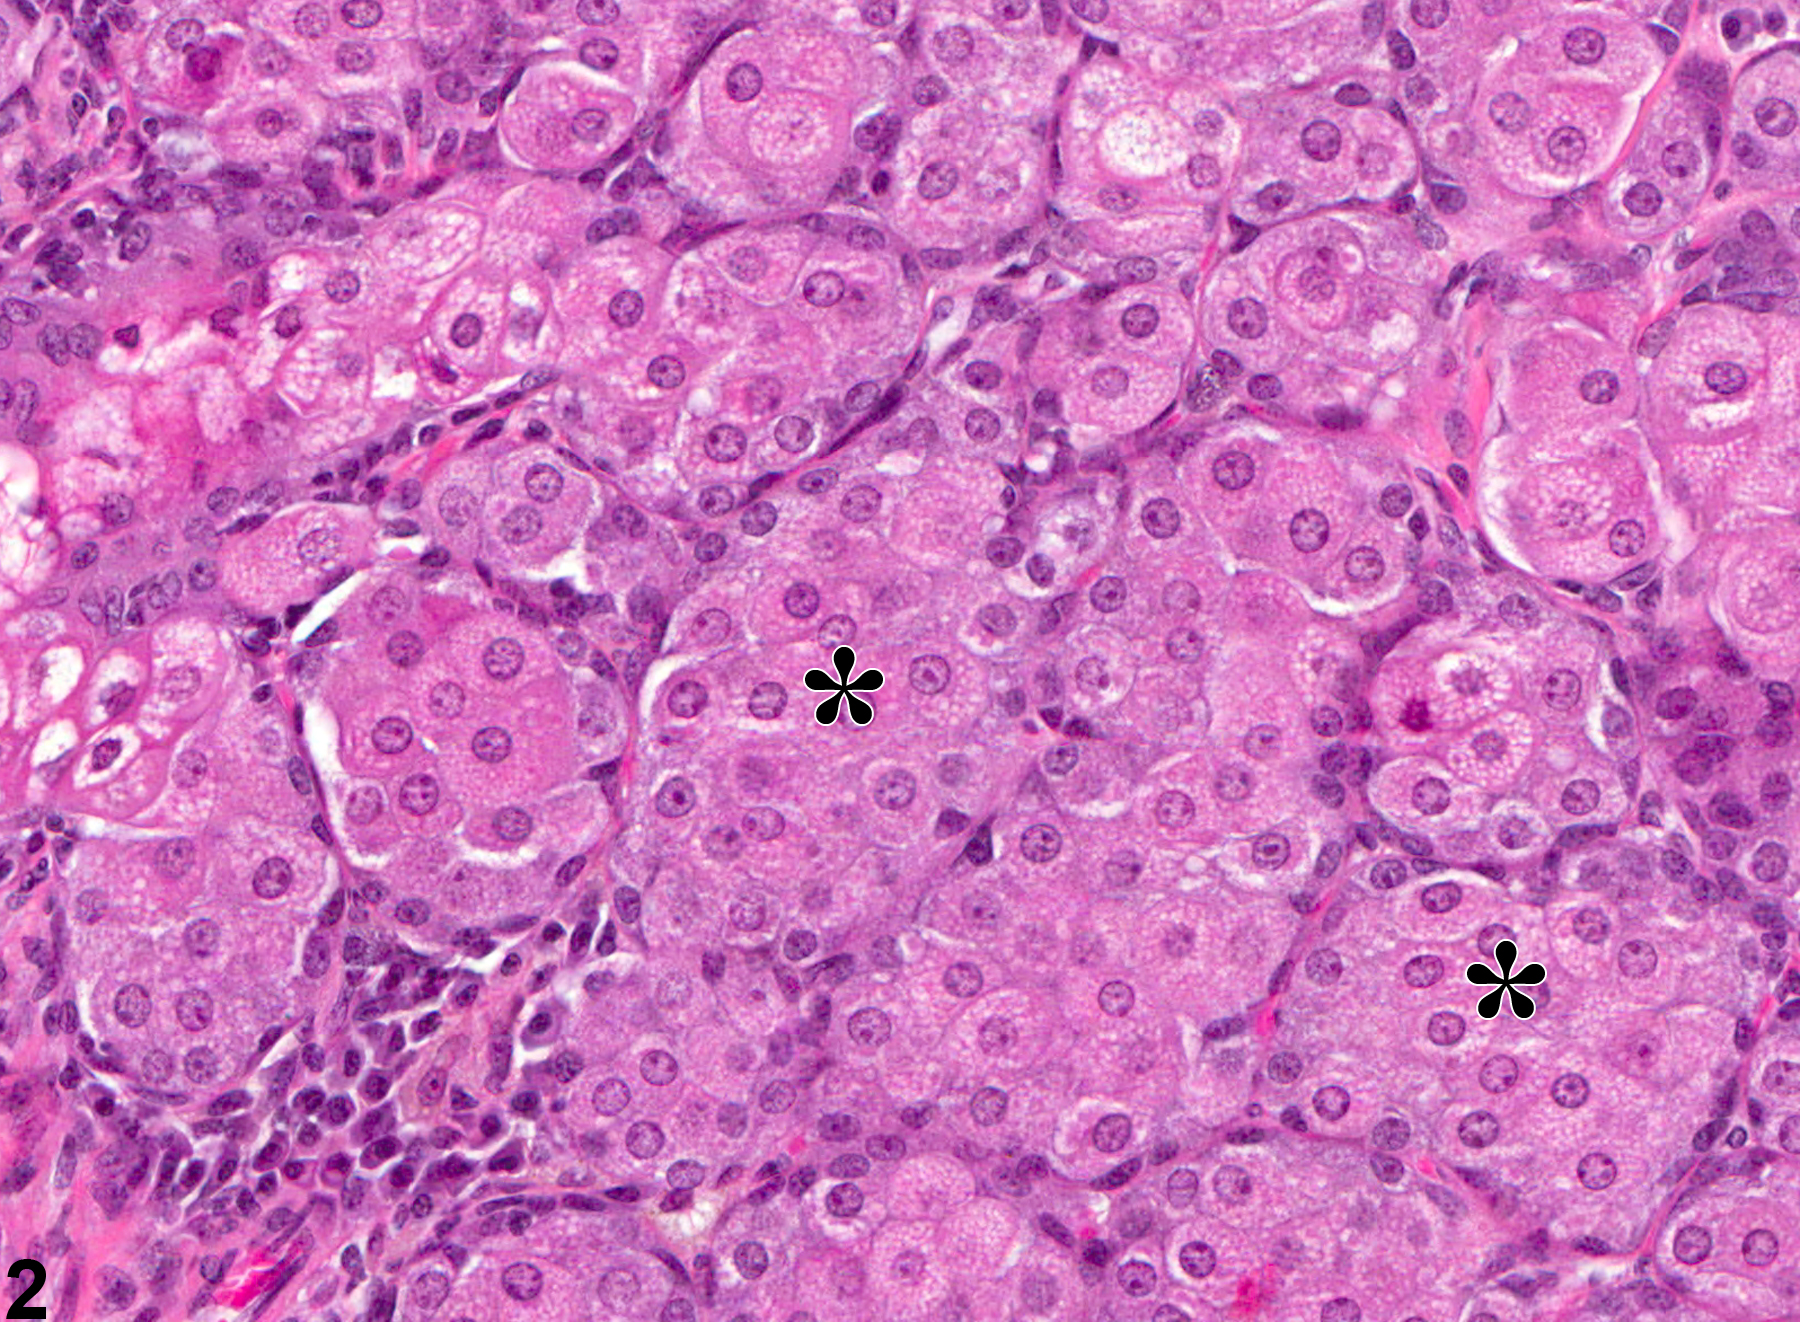 Image of epithelial hyperplasia in the preputial gland from a male F344/N rat in a chronic study